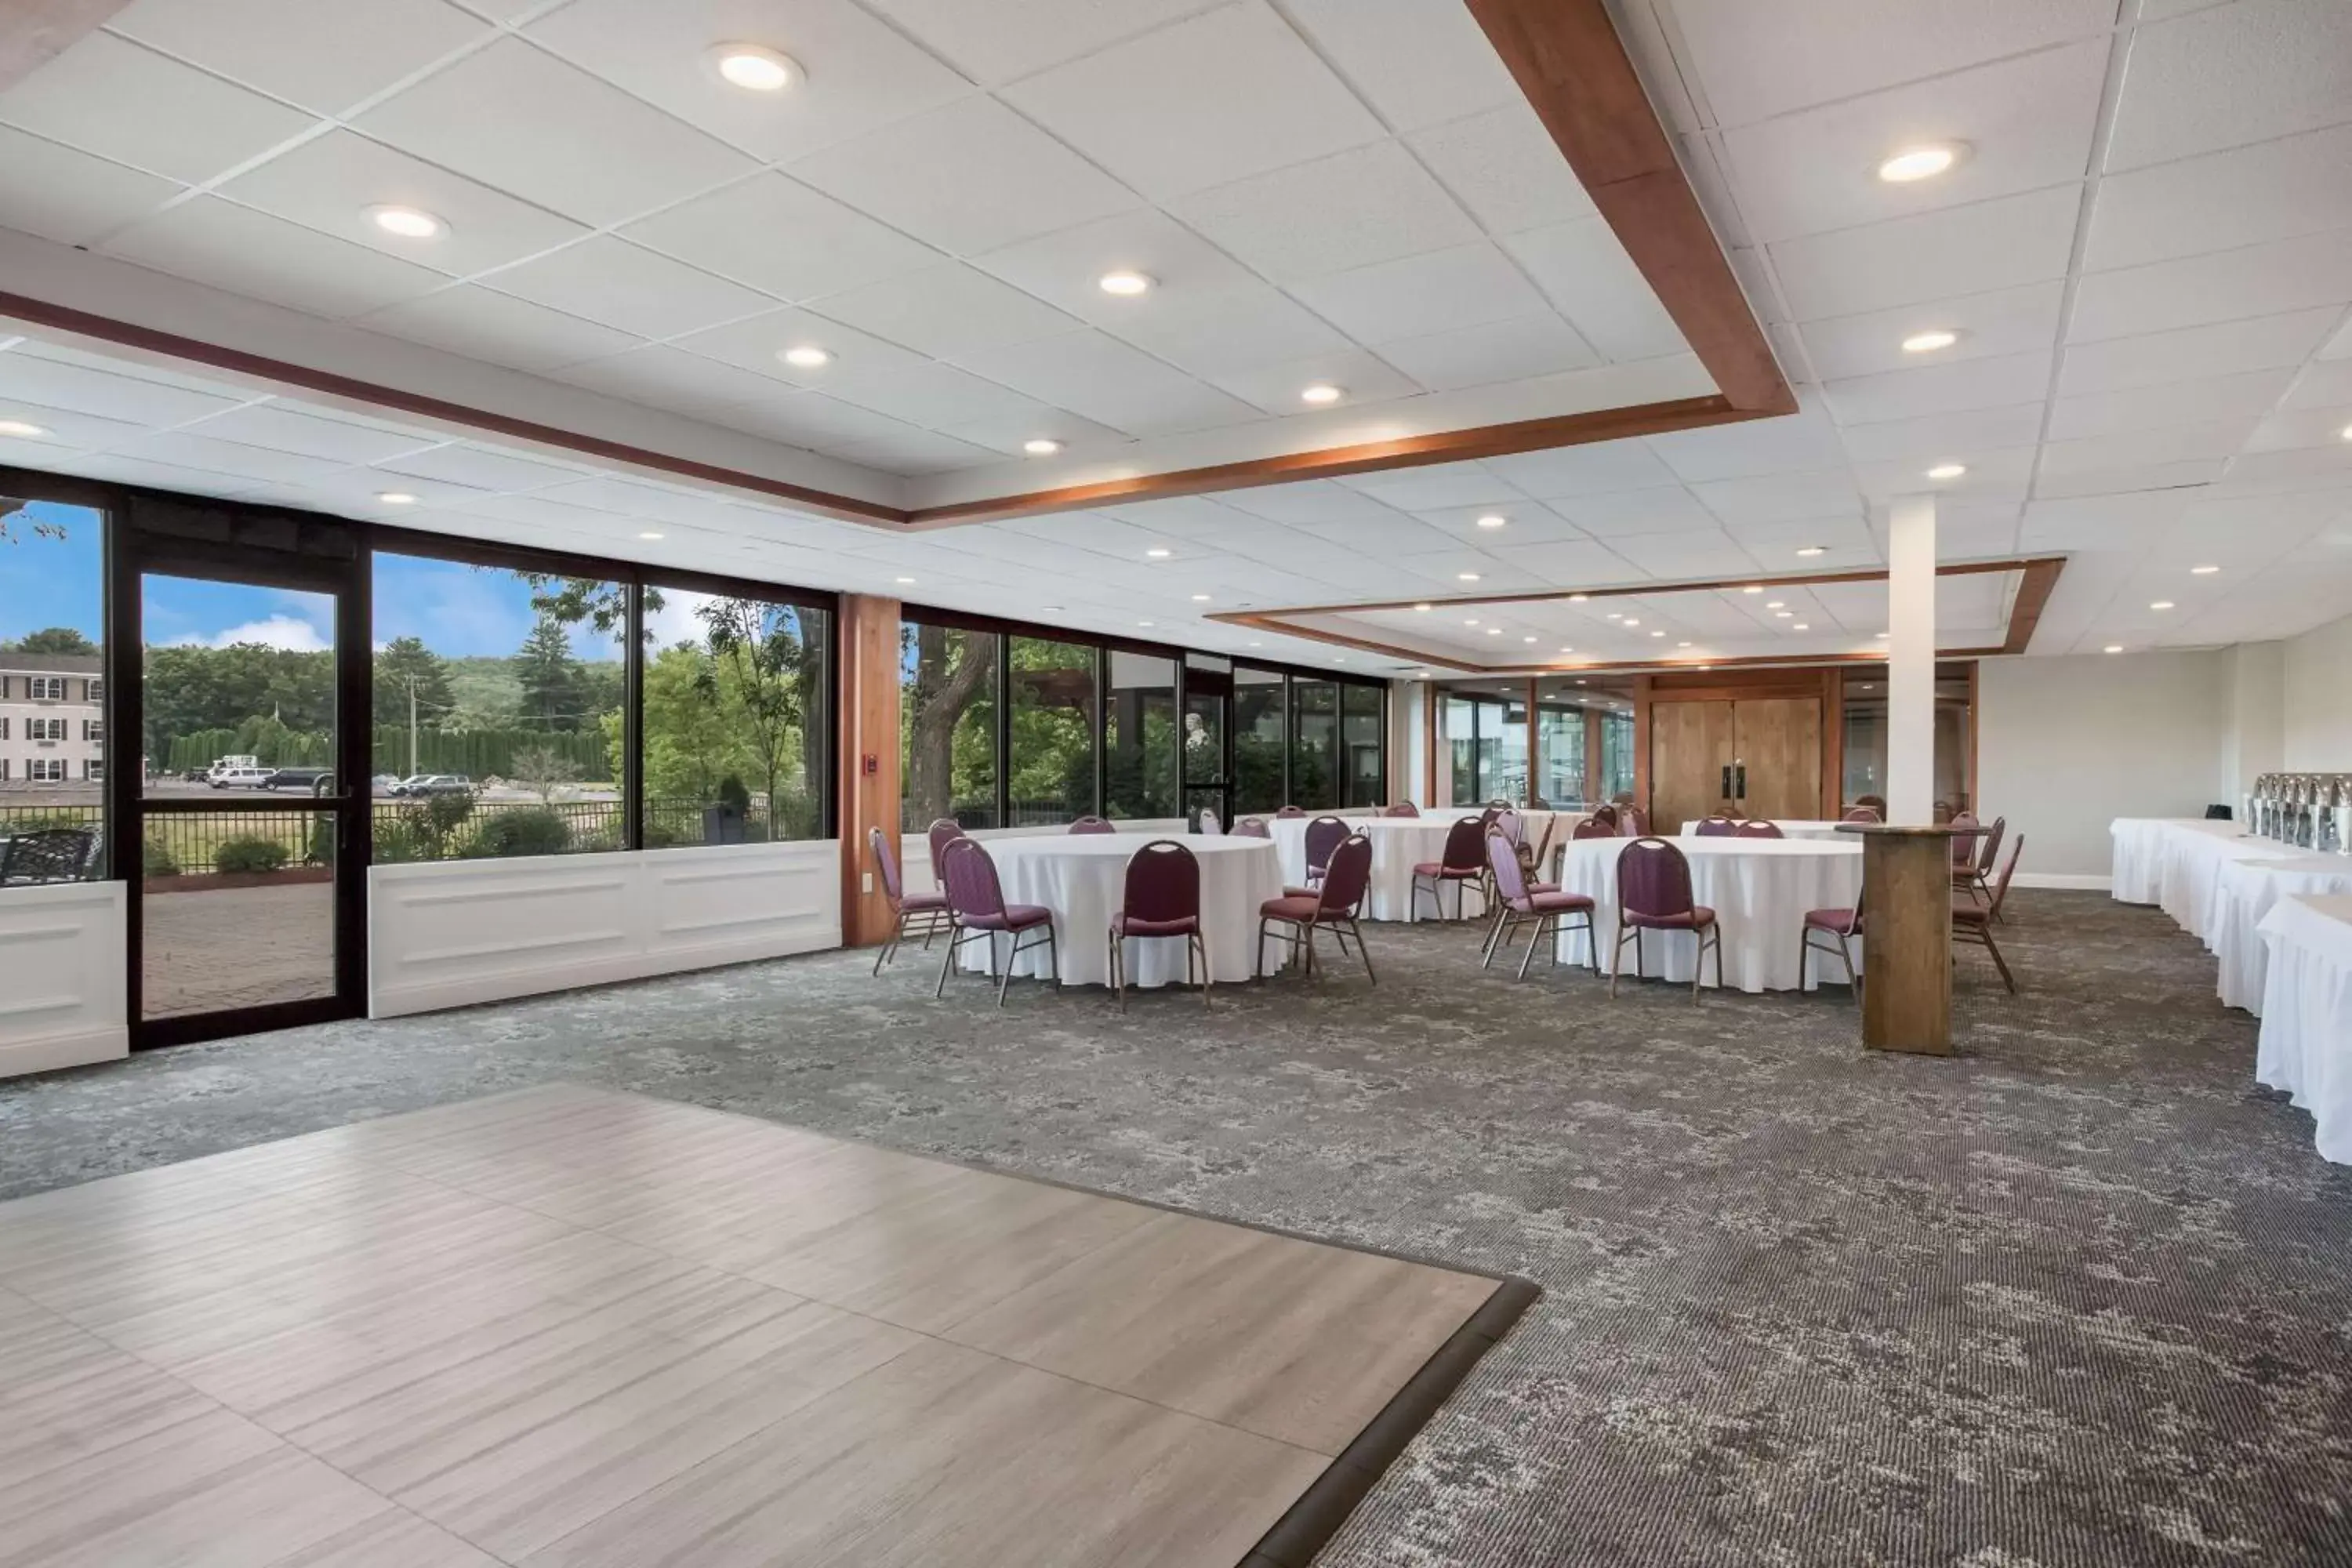 Meeting/conference room, Banquet Facilities in Best Western Hunt's Landing Hotel Matamoras Milford